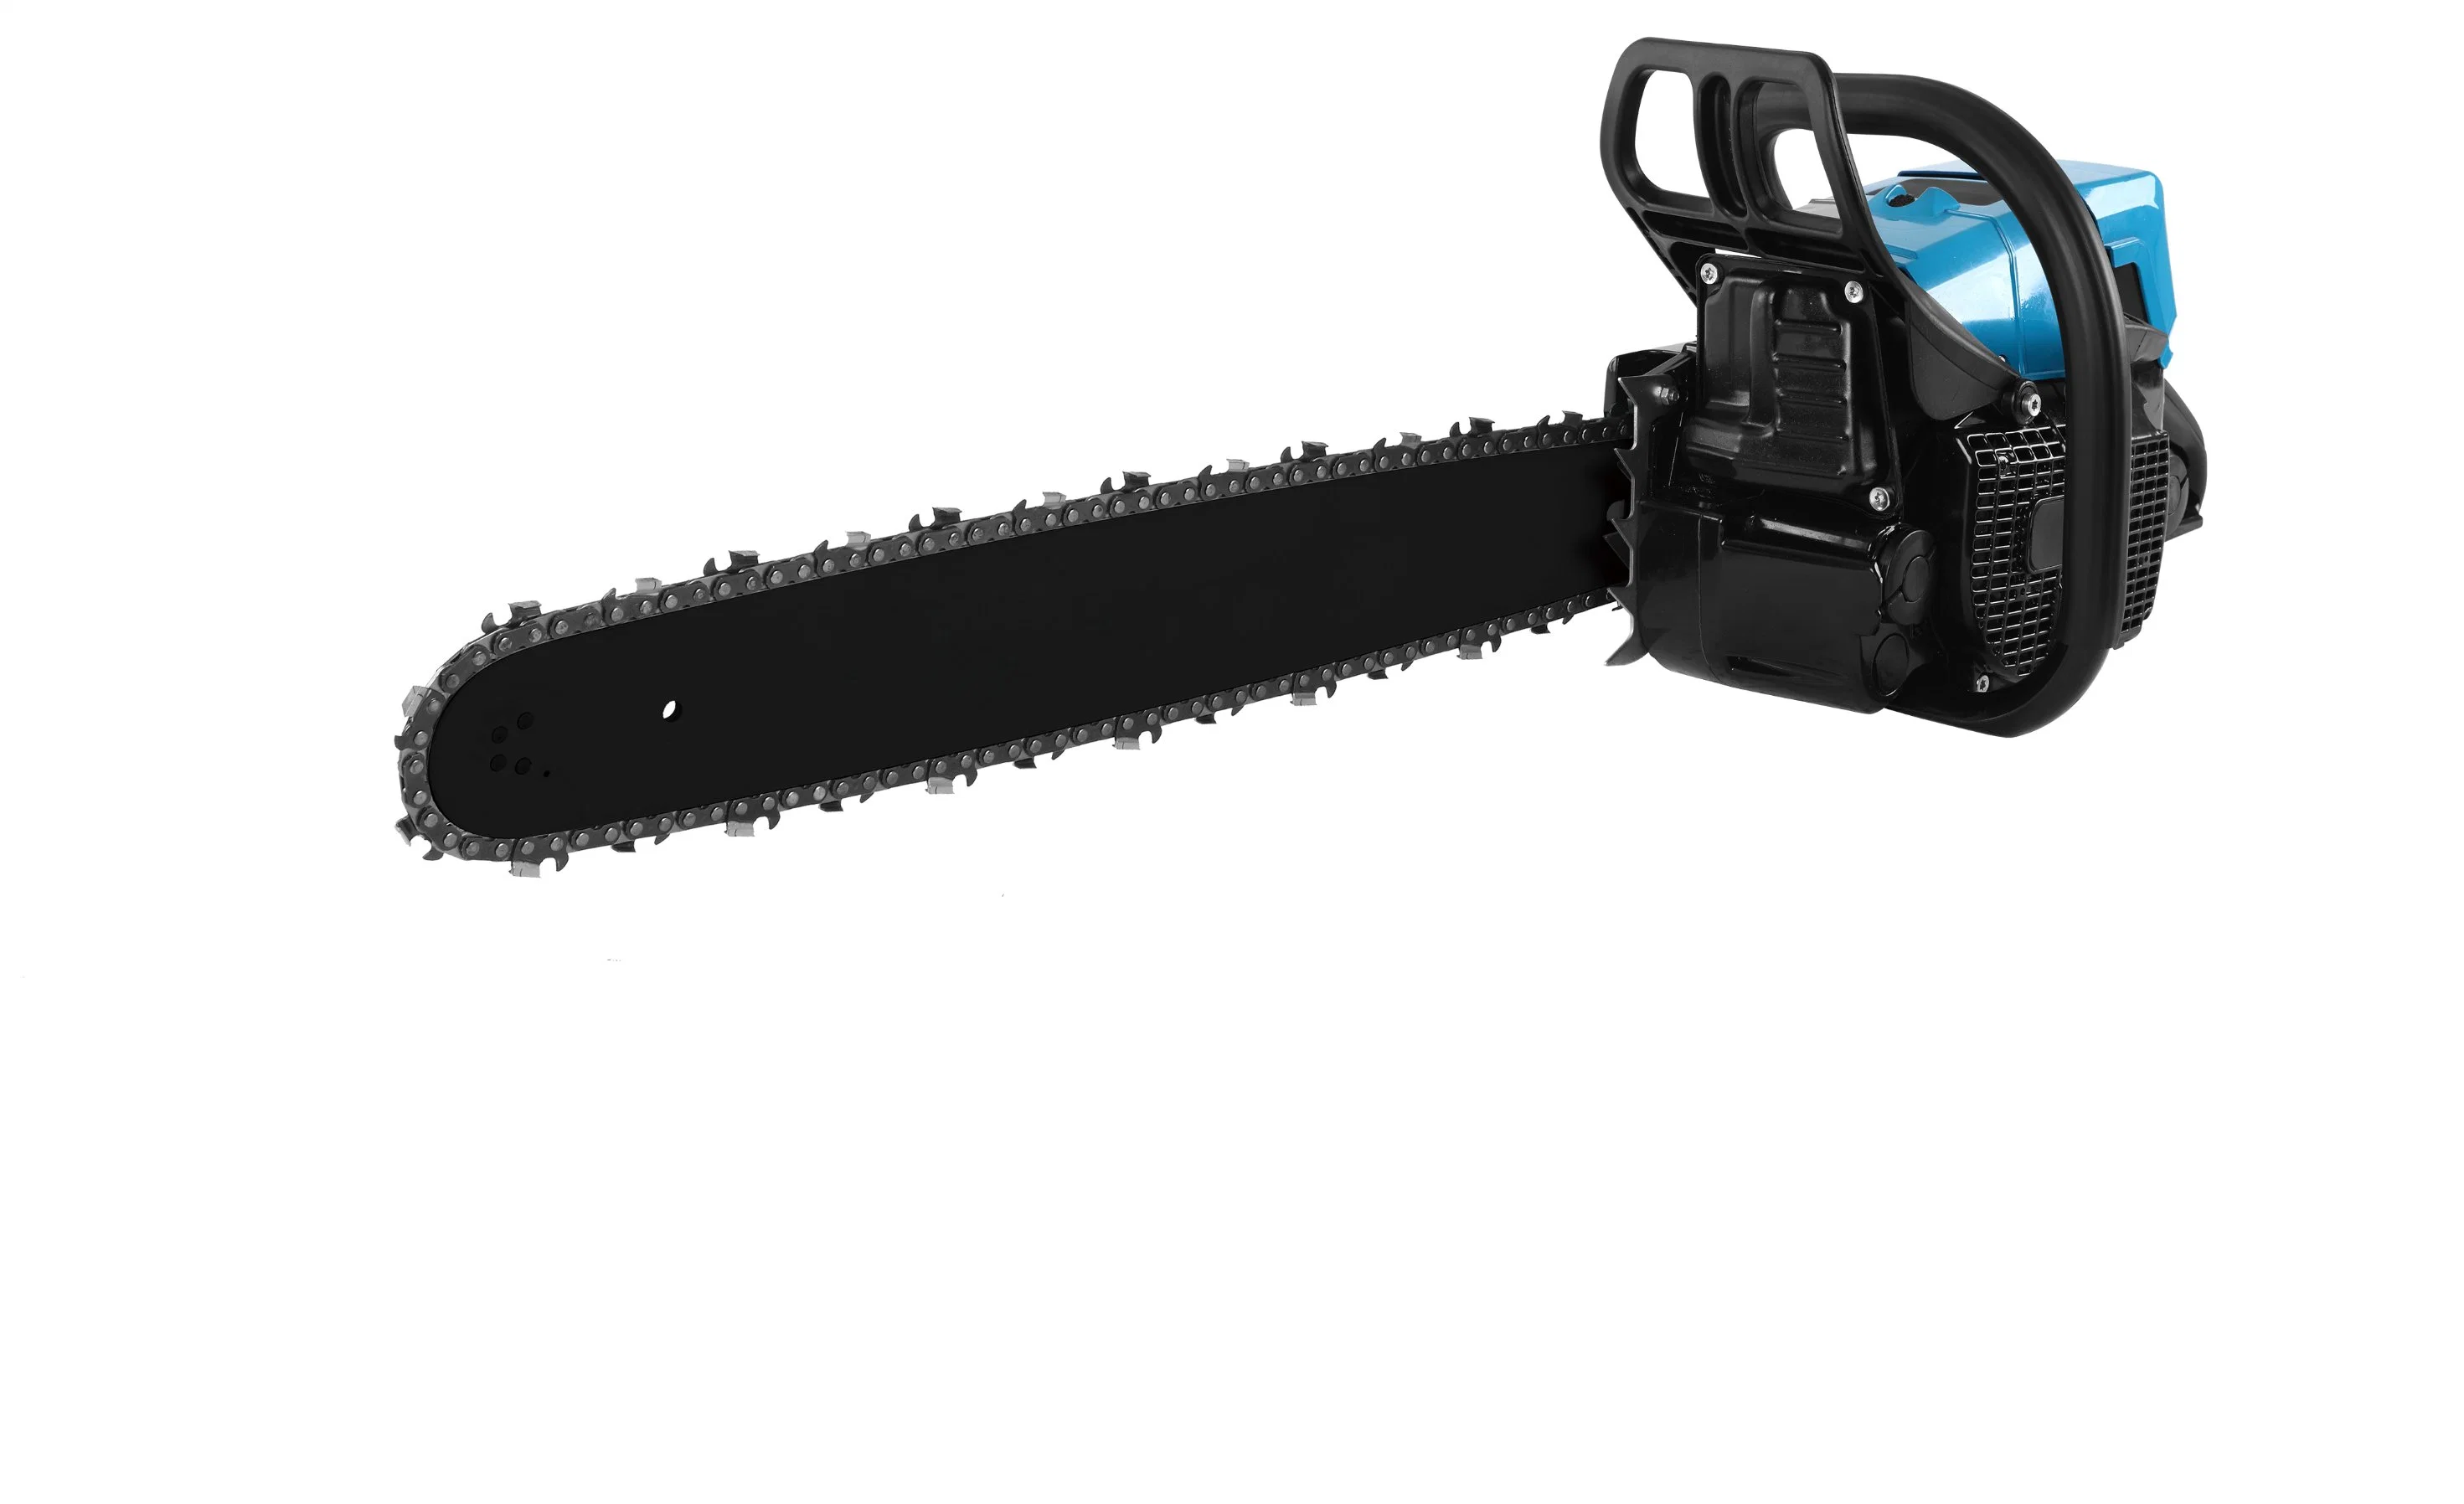 Hanakawa H971 (440) 70.7cc 20inch Power Chain Saw 2-Cycle Handed Petrol Chainsaws Gasoline Chain Saws Garden Tool for Cutting Wood Outdoor Home Farm Use